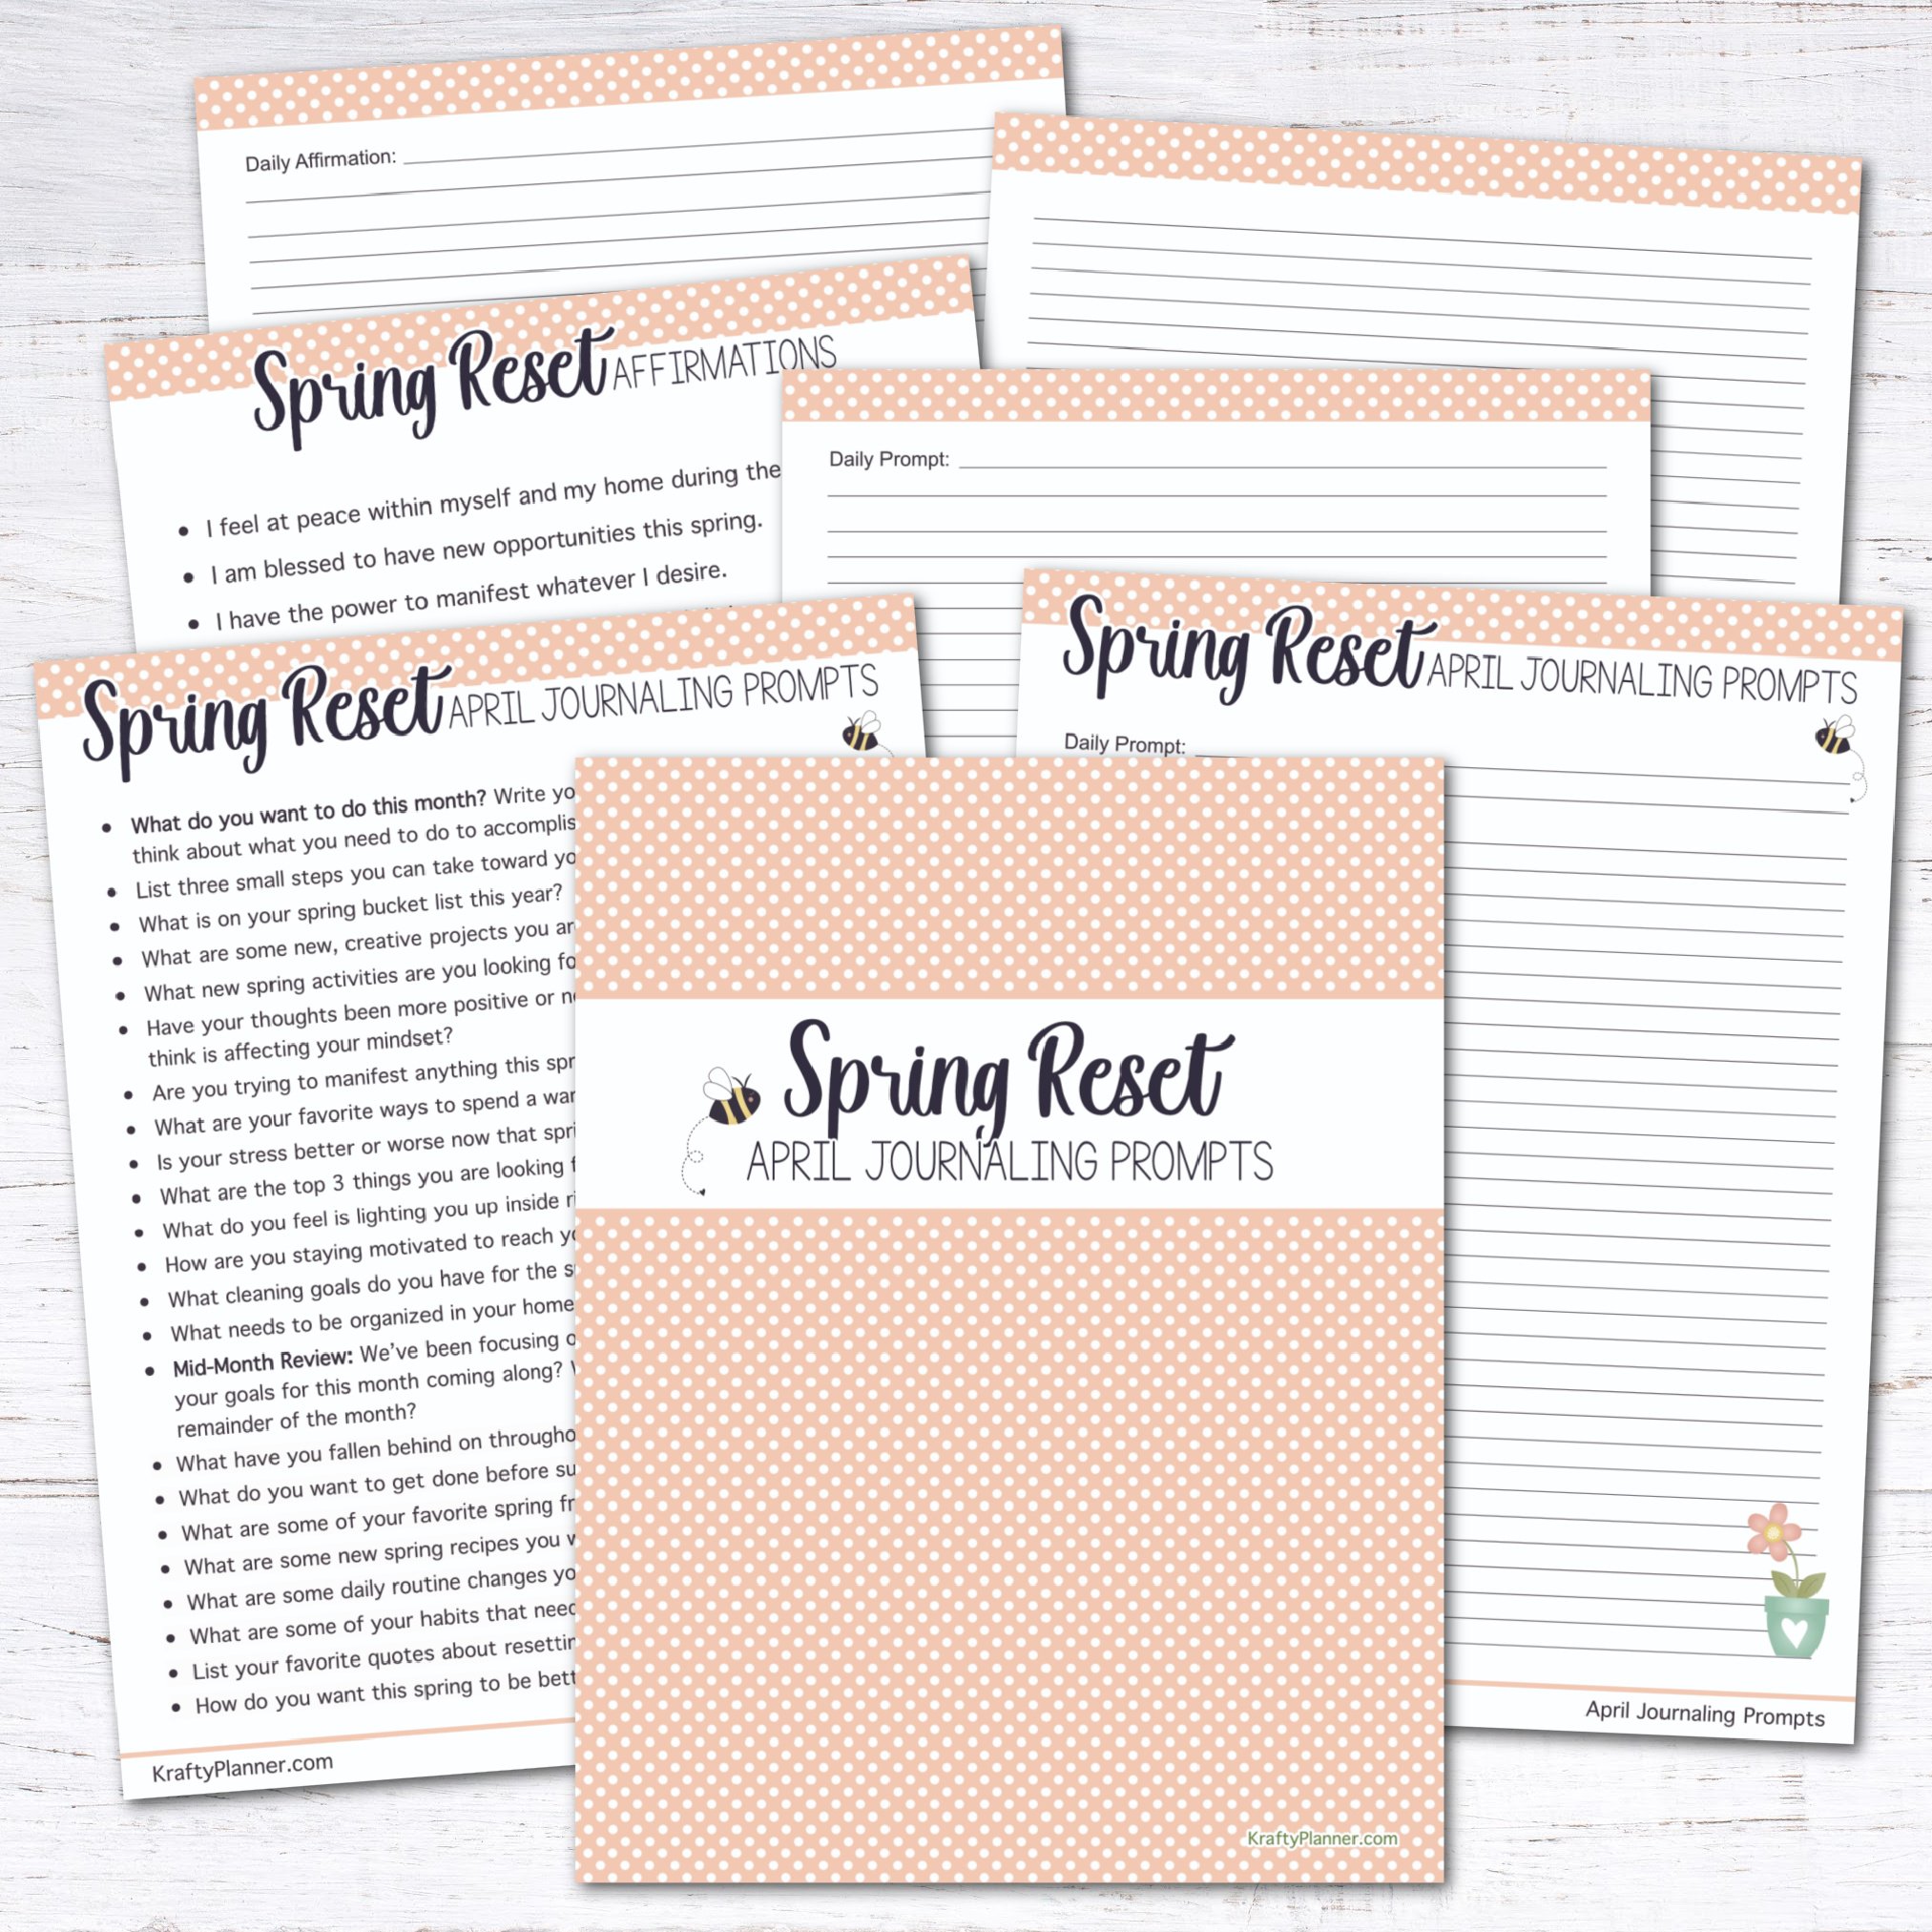 Spring Reset Journaling Prompts and Affirmations